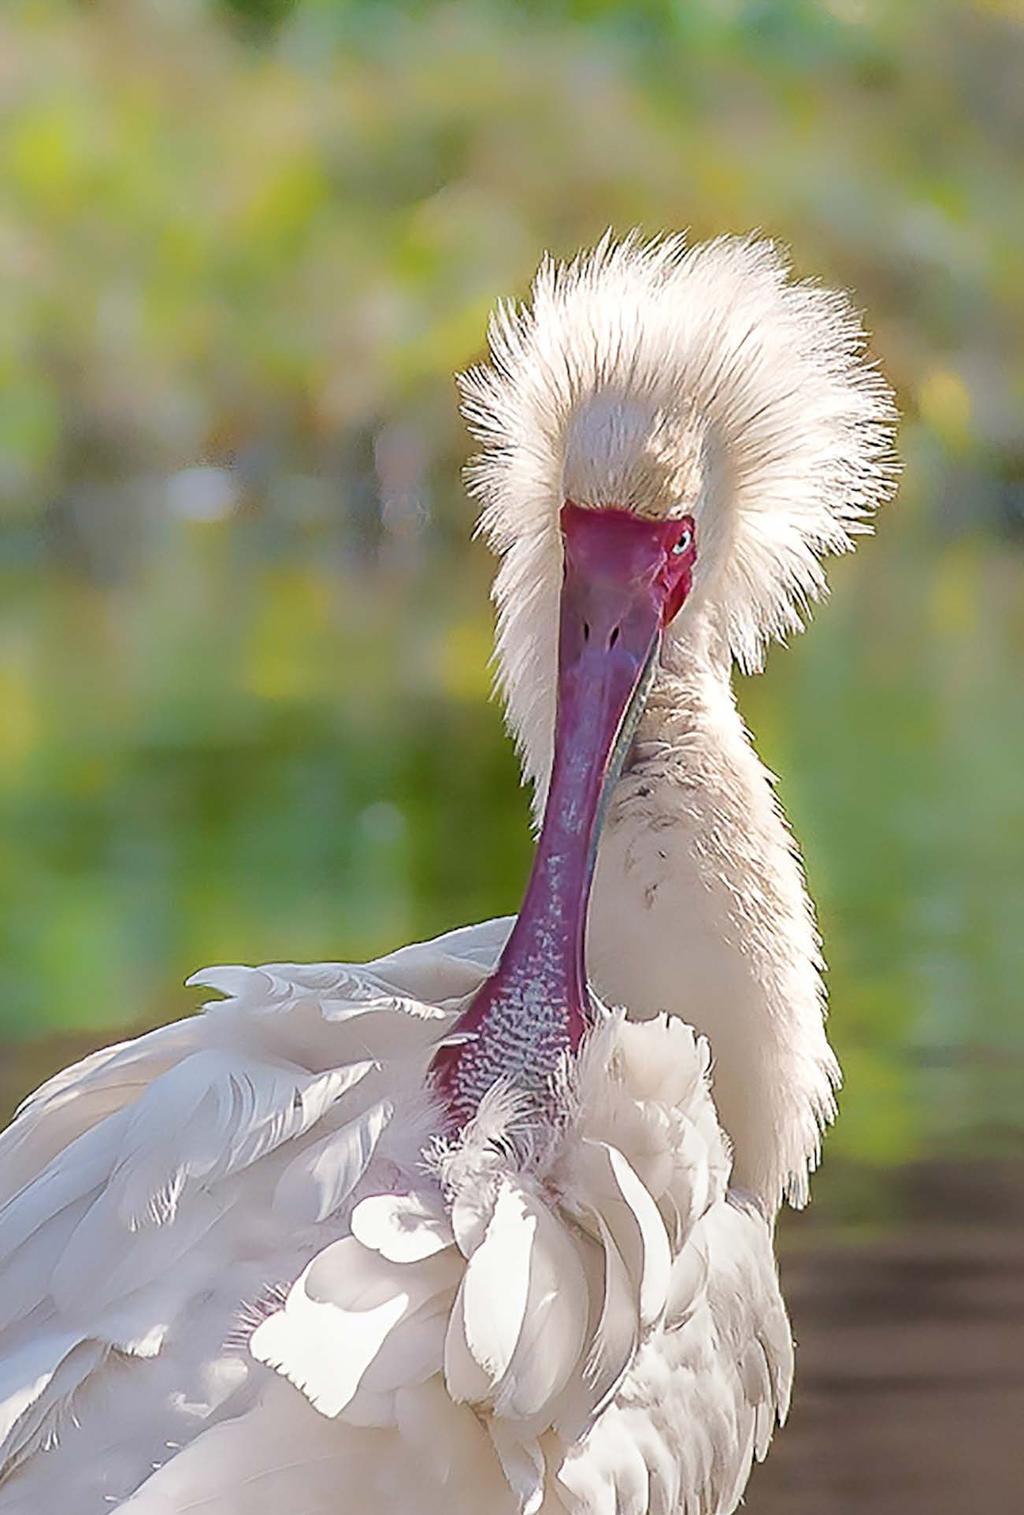 This backlit spoonbill s feathers created an interesting subject with the help of a breeze.